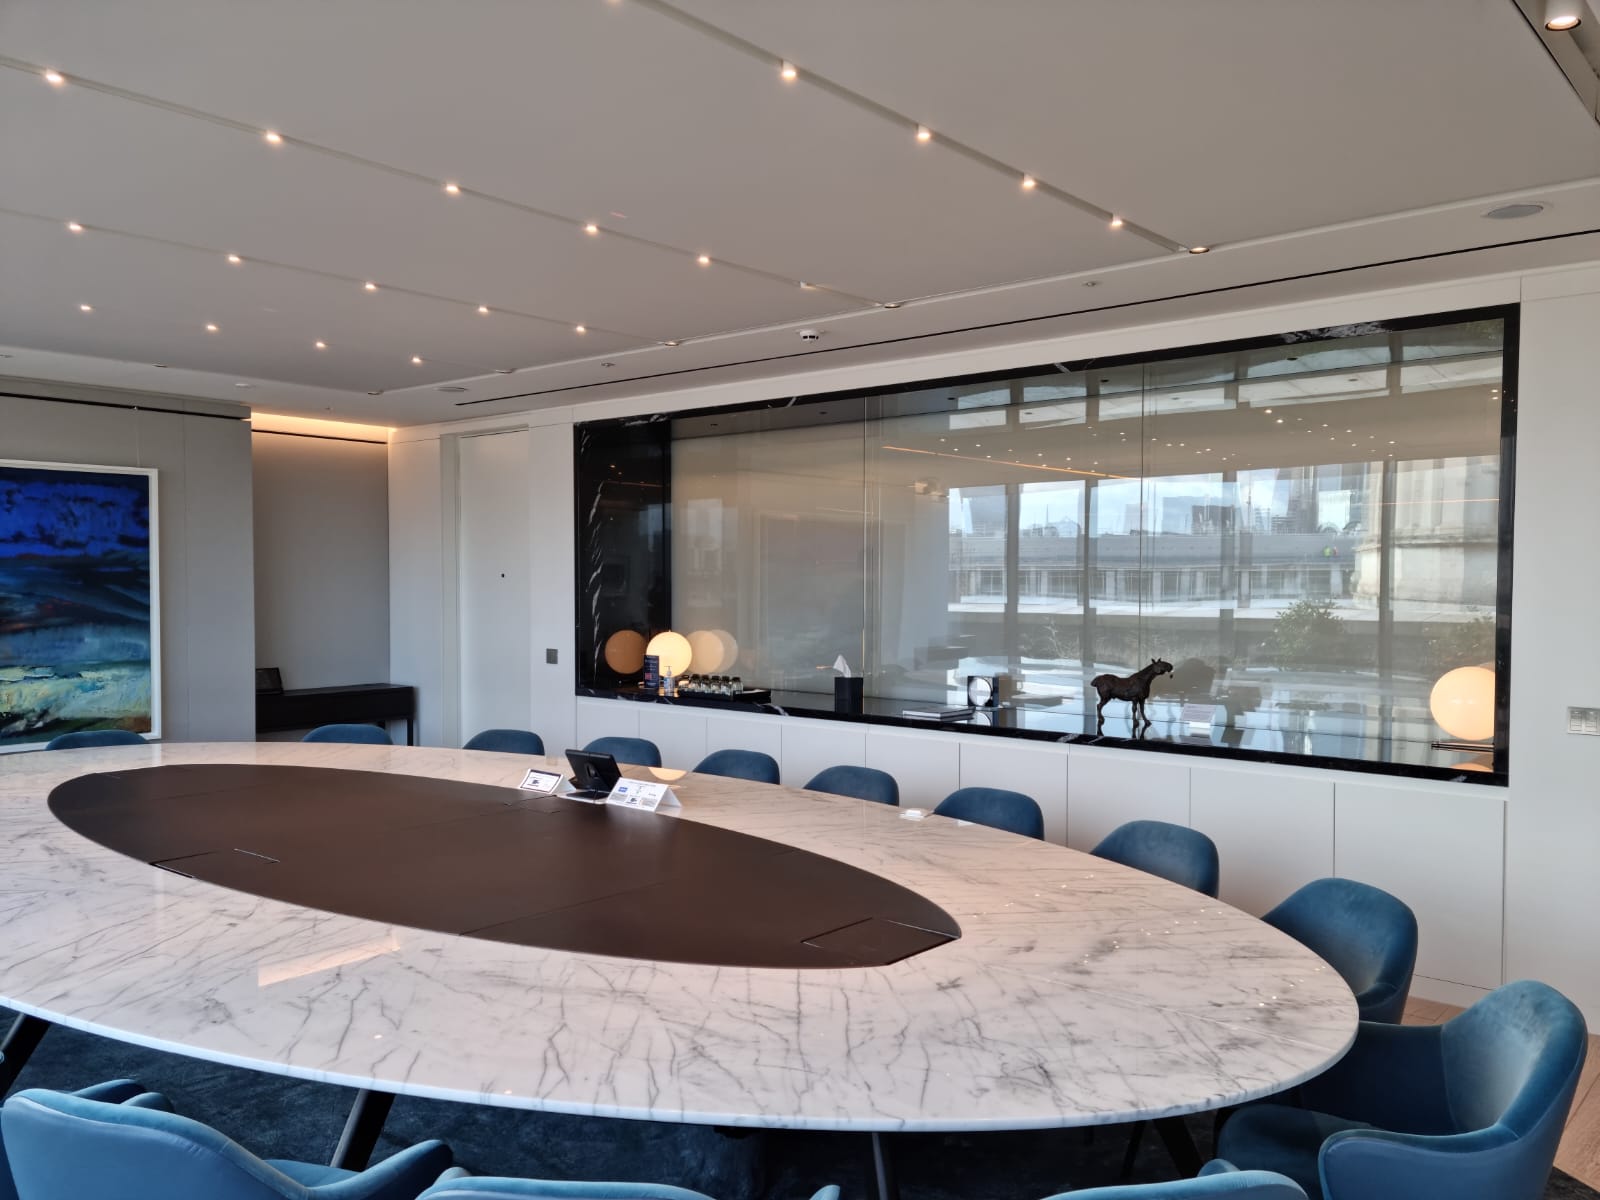 Boardroom showcasing privacy glass partition with adjacent walkway, off position